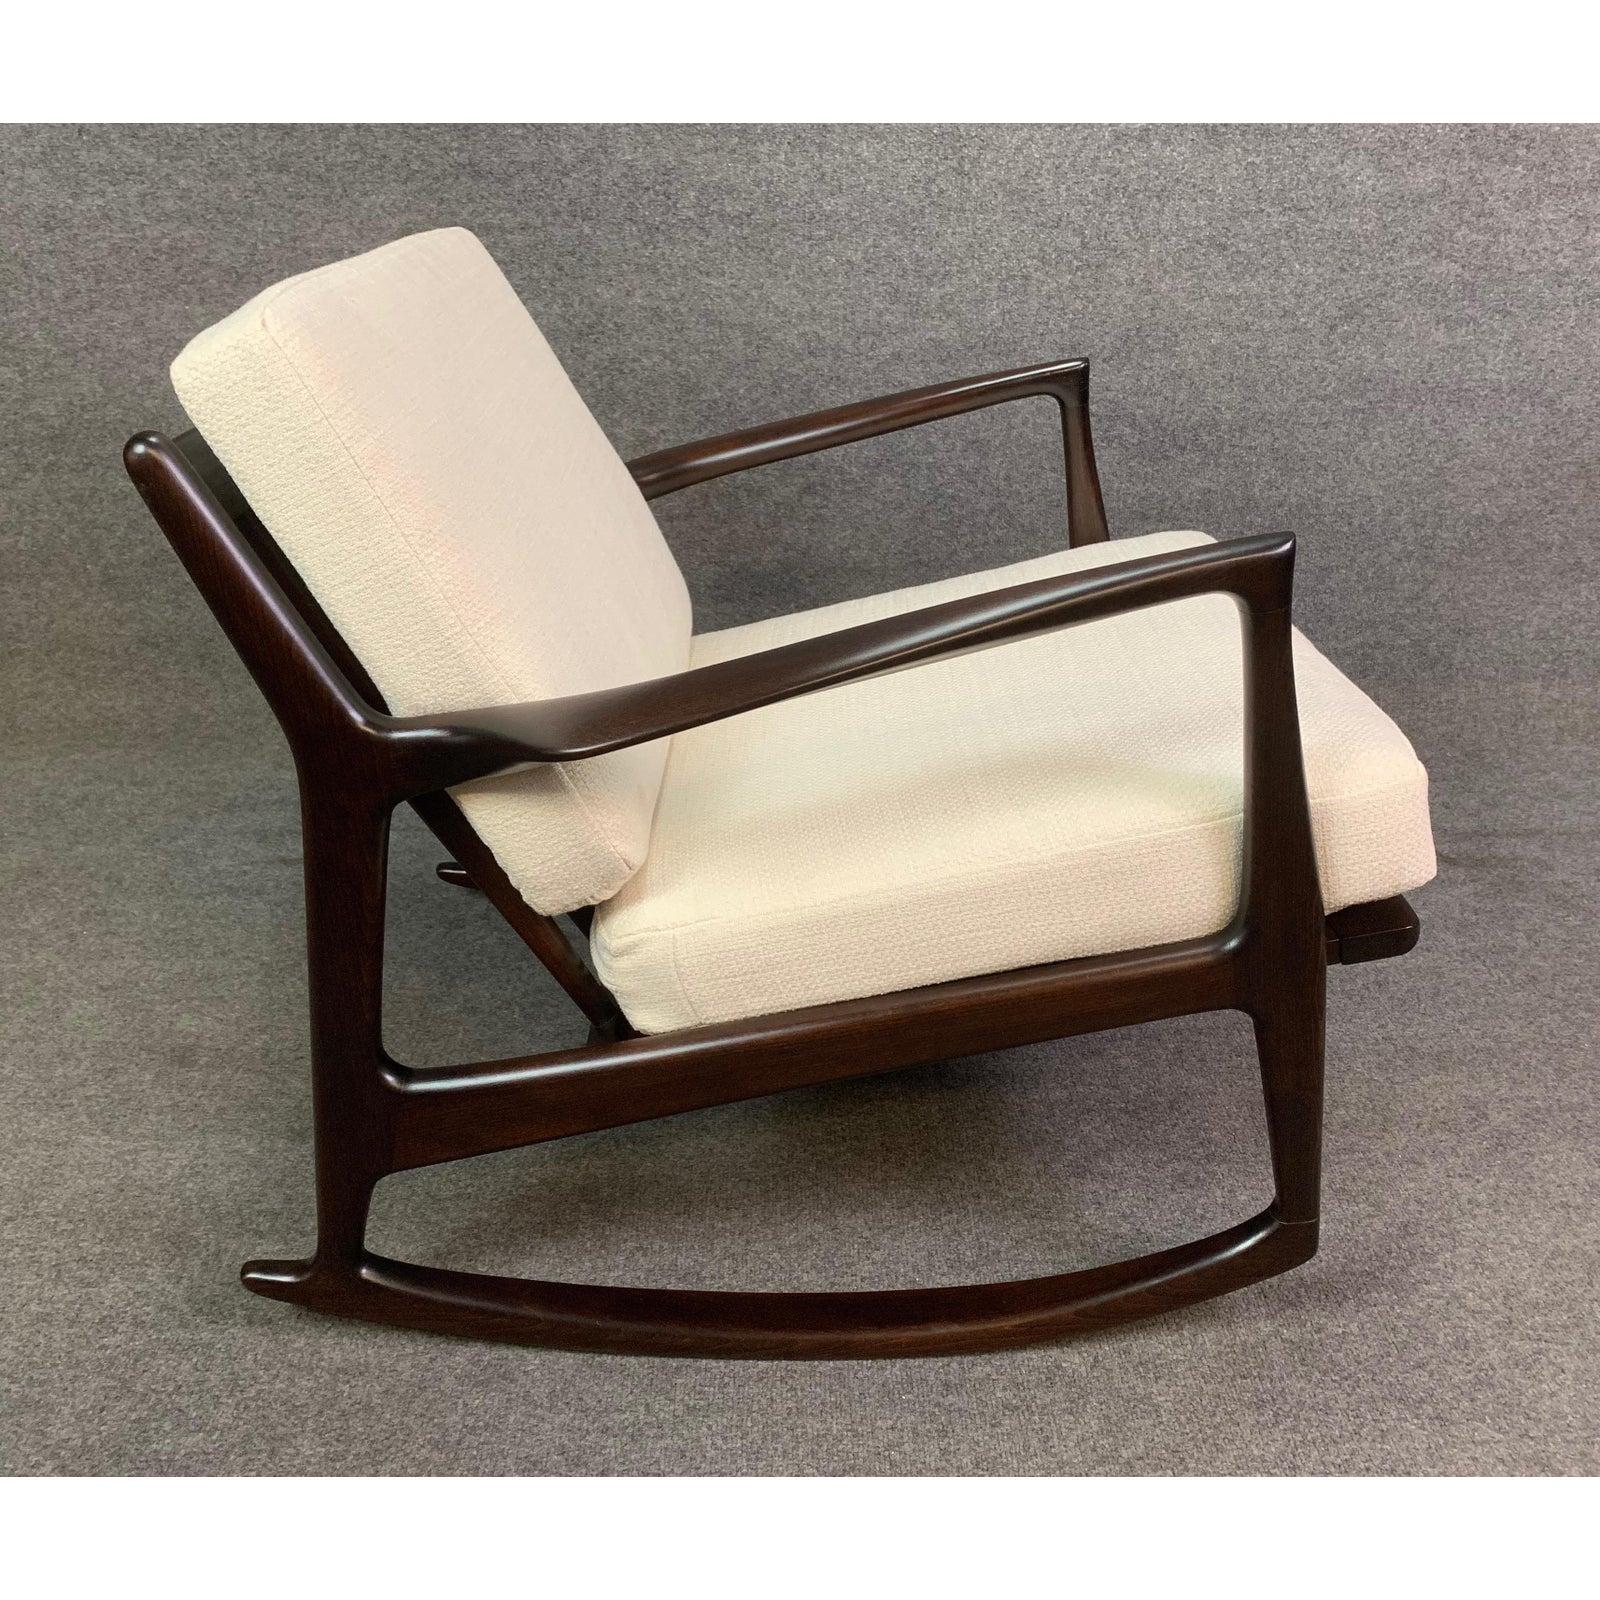 Vintage Danish Mid-Century Modern Rocking Chair by Kofod Larsen for Selig For Sale 1